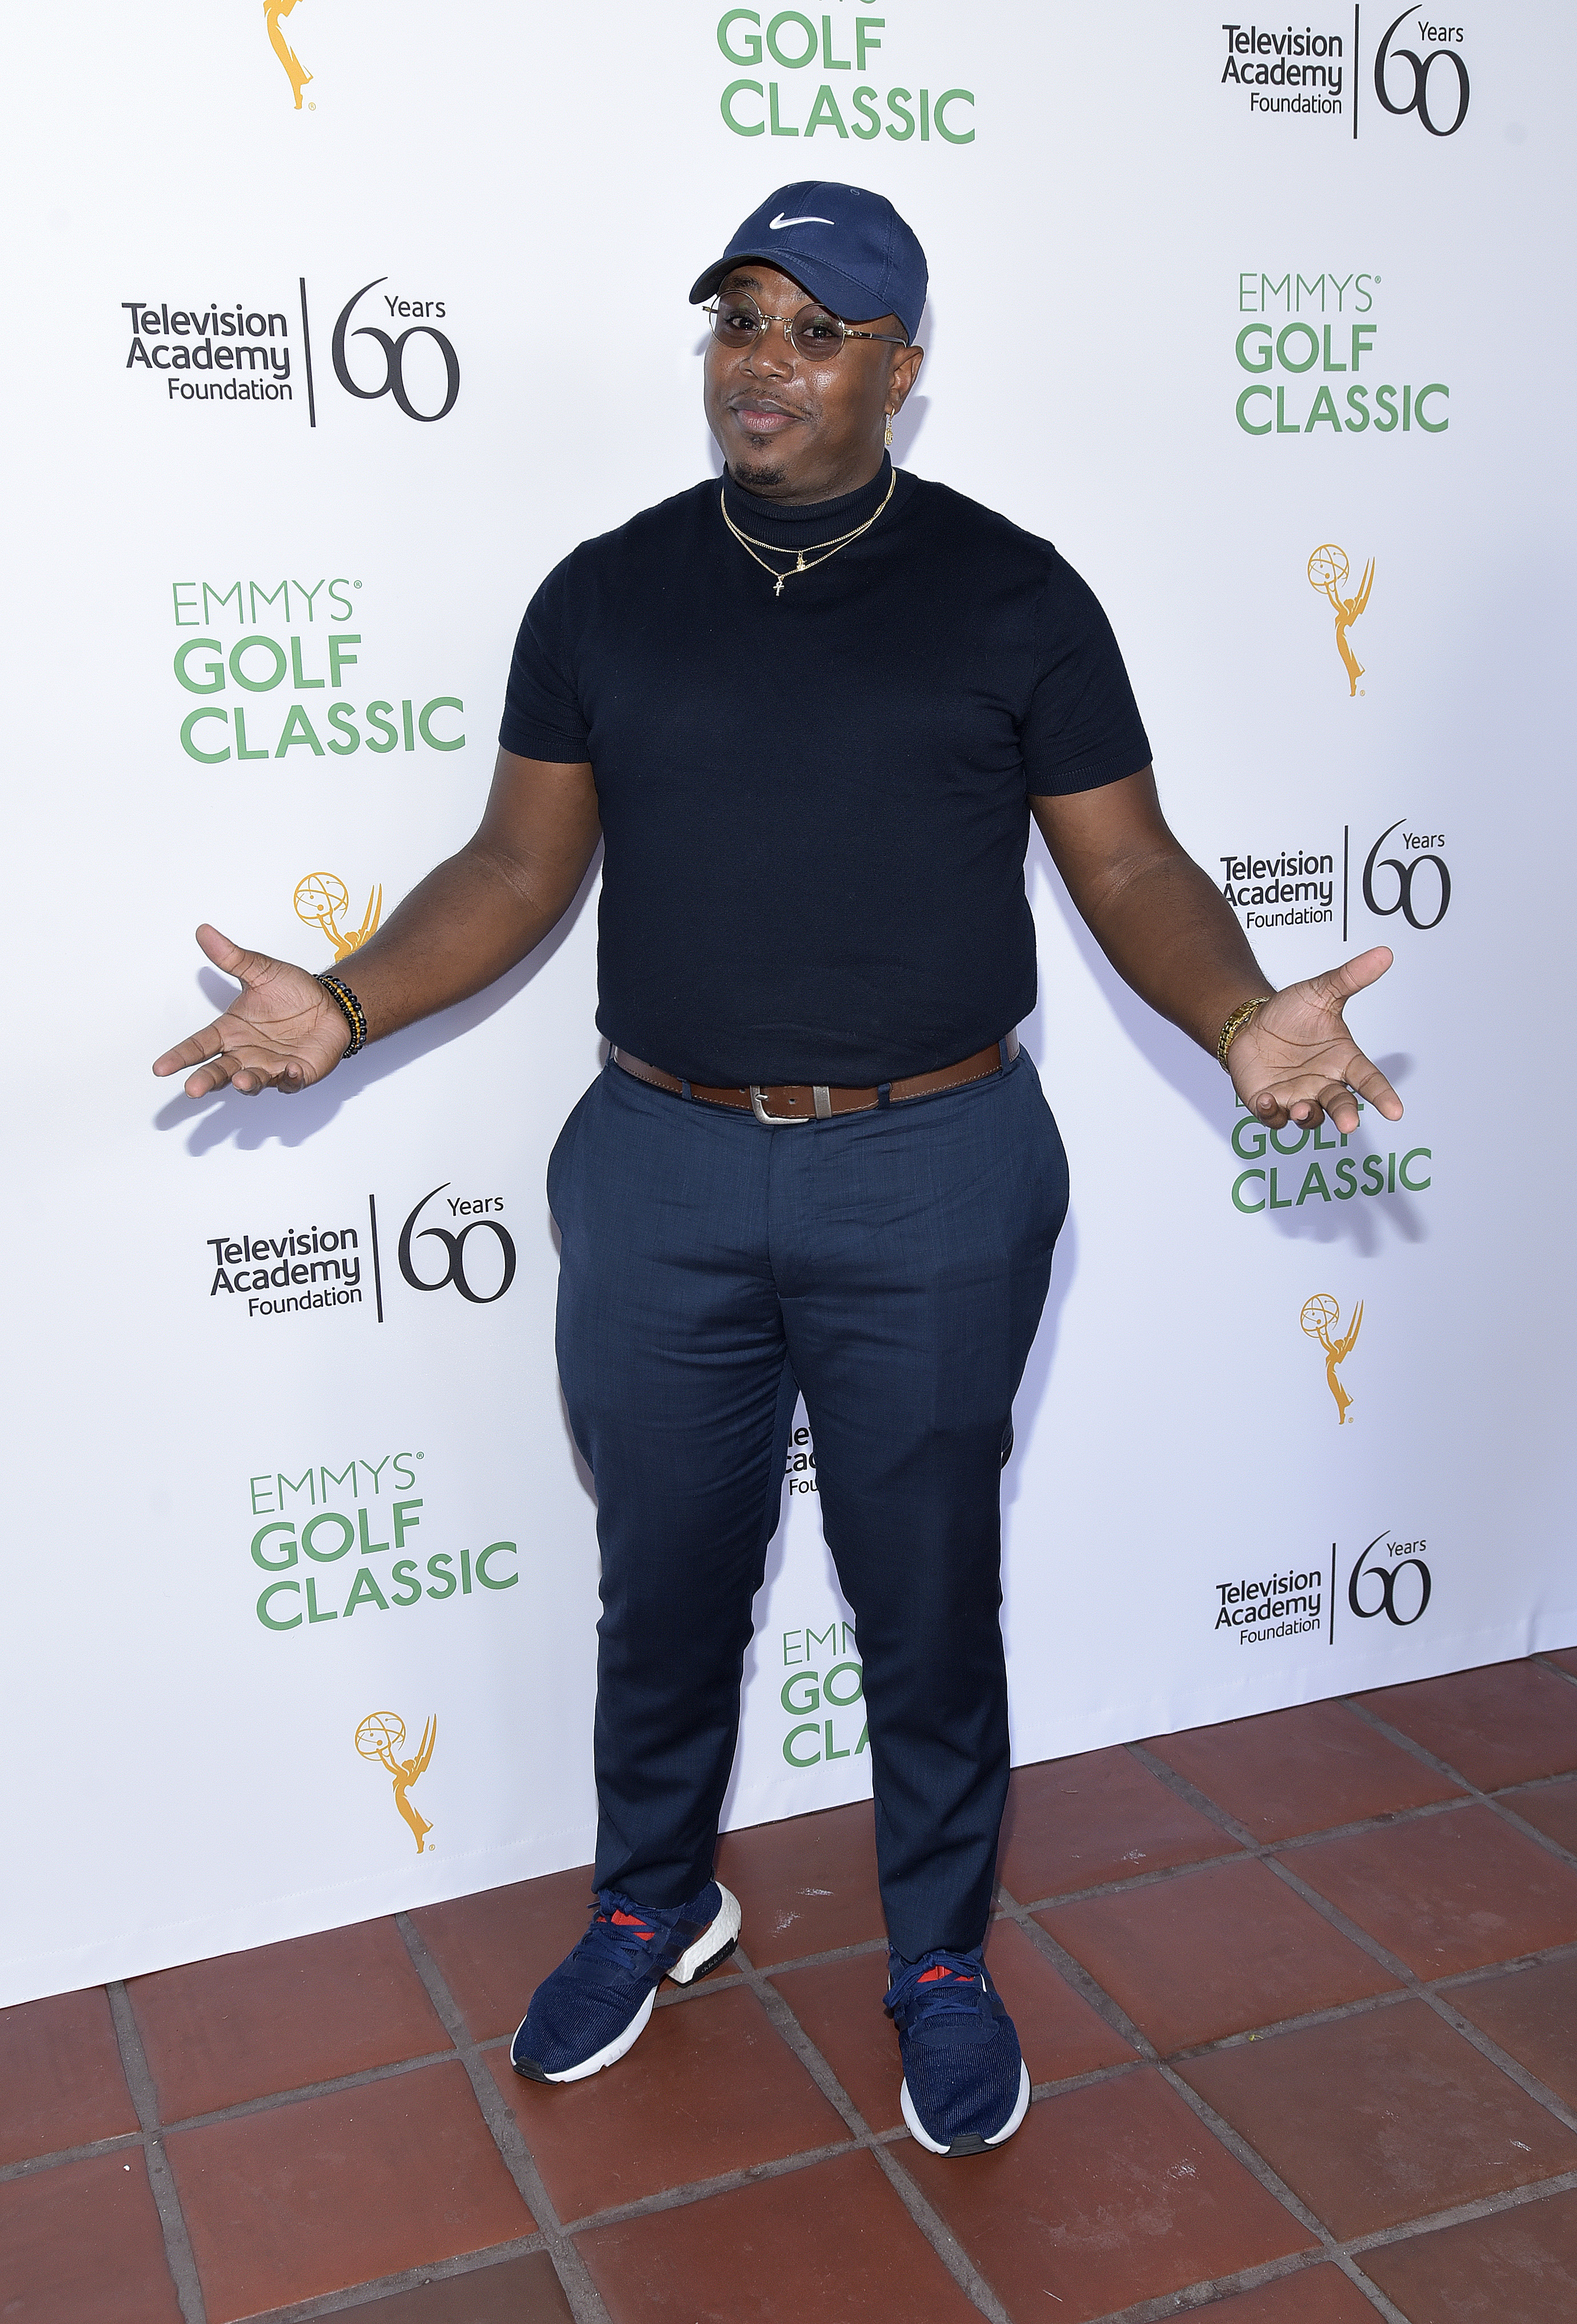 20th Annual Emmys Golf Classic Benefiting The Television Academy Foundation